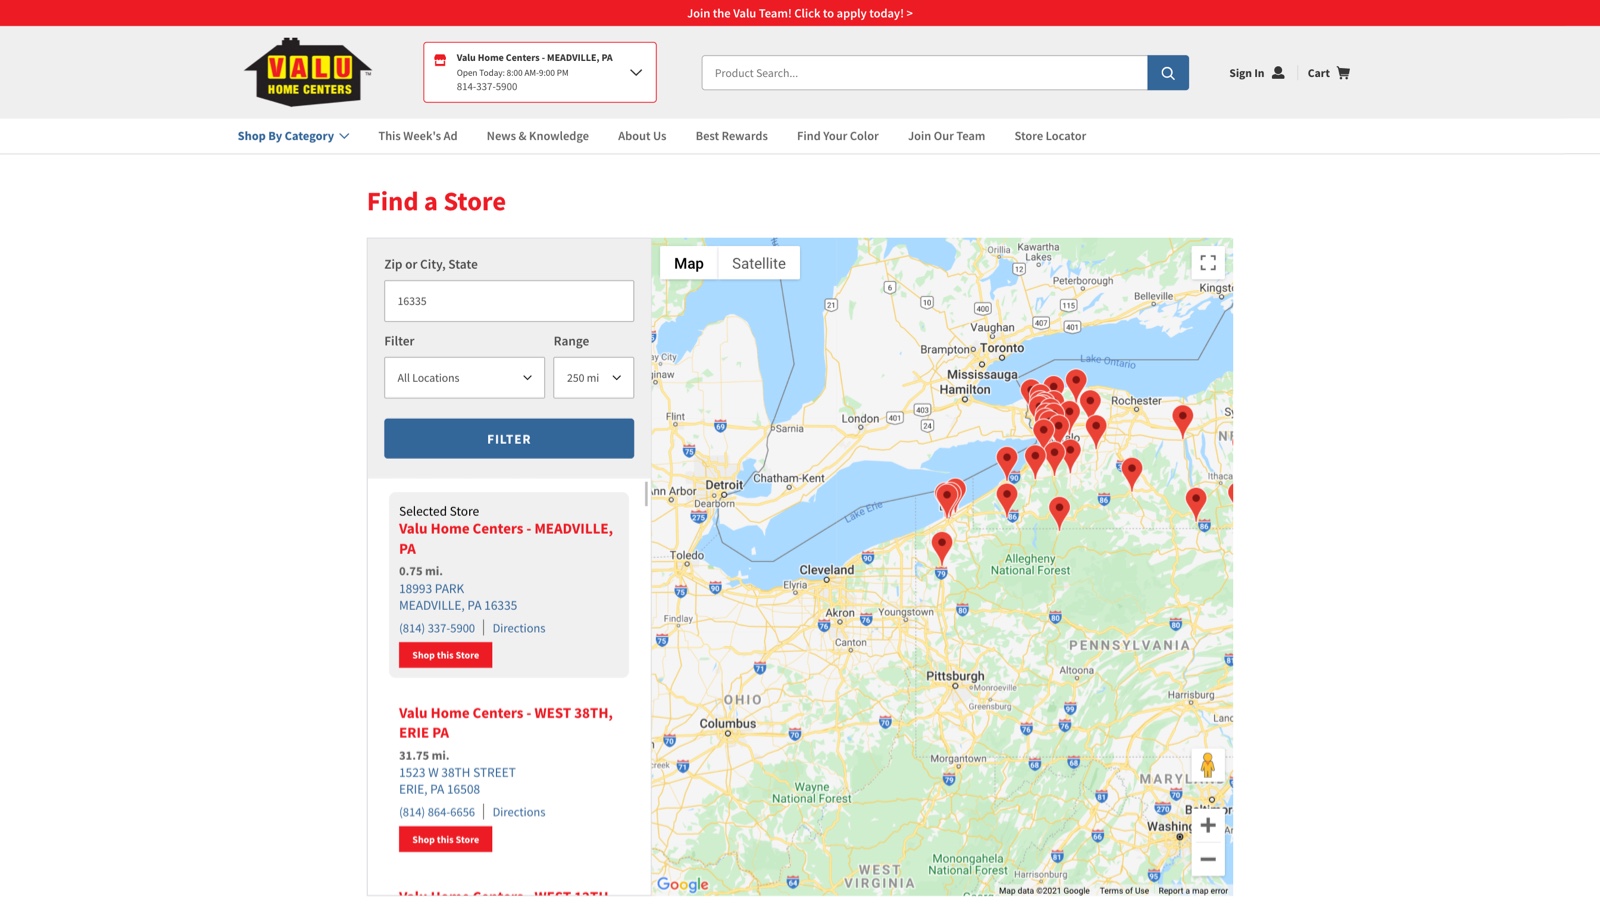 Valu Home Centers example of Do it Best member site